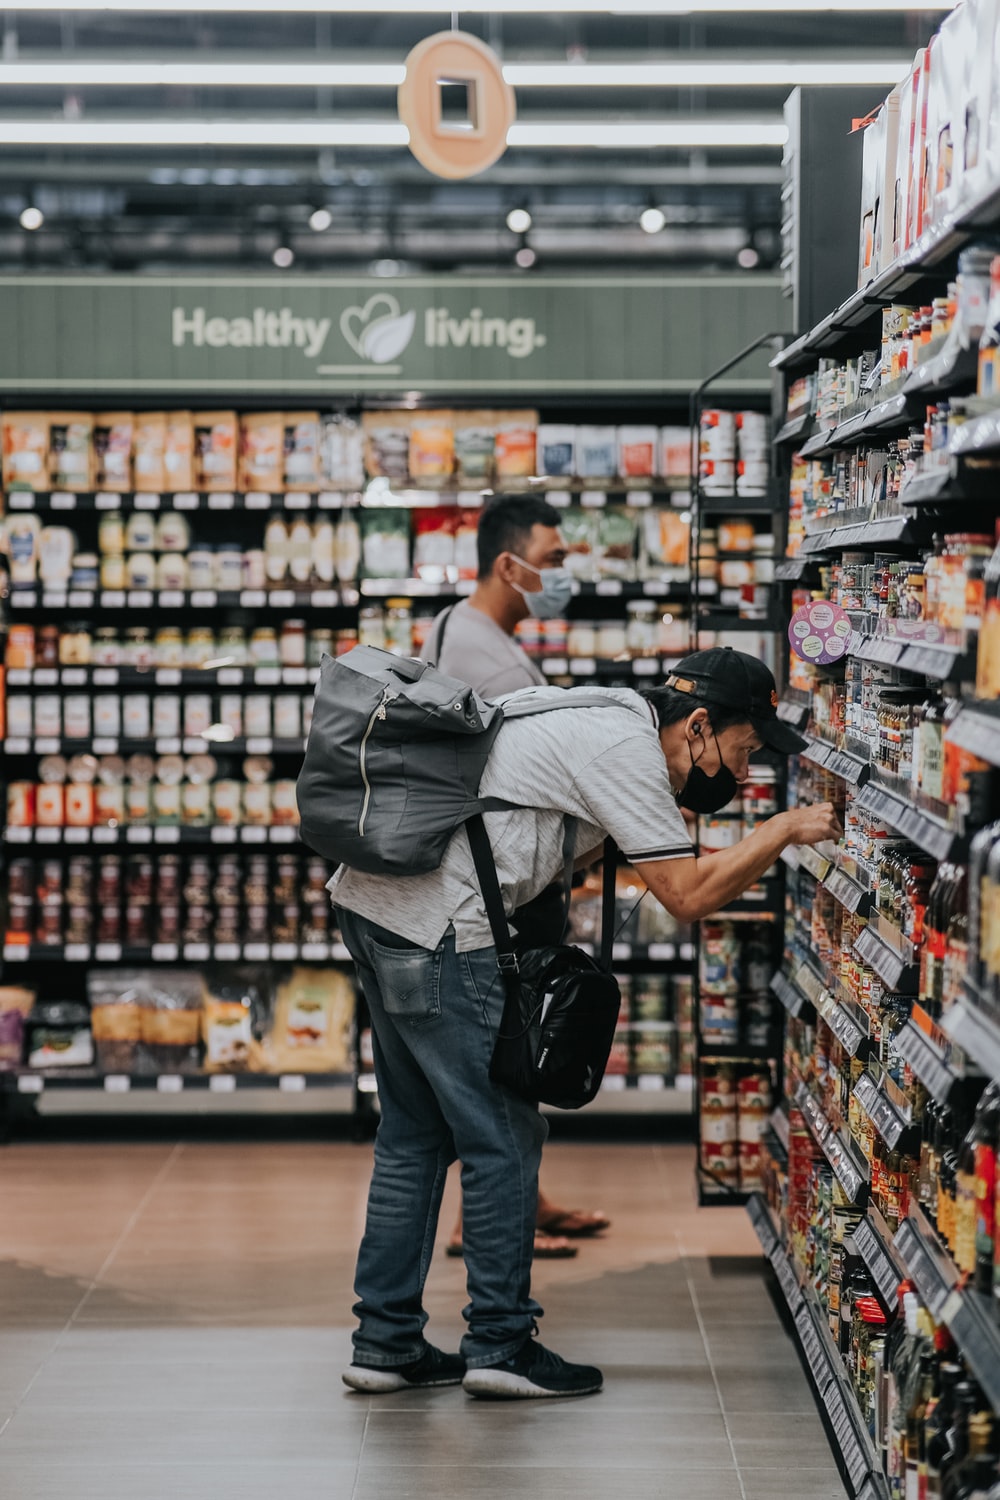 Grocery Store Picture [HD]. Download Free Image